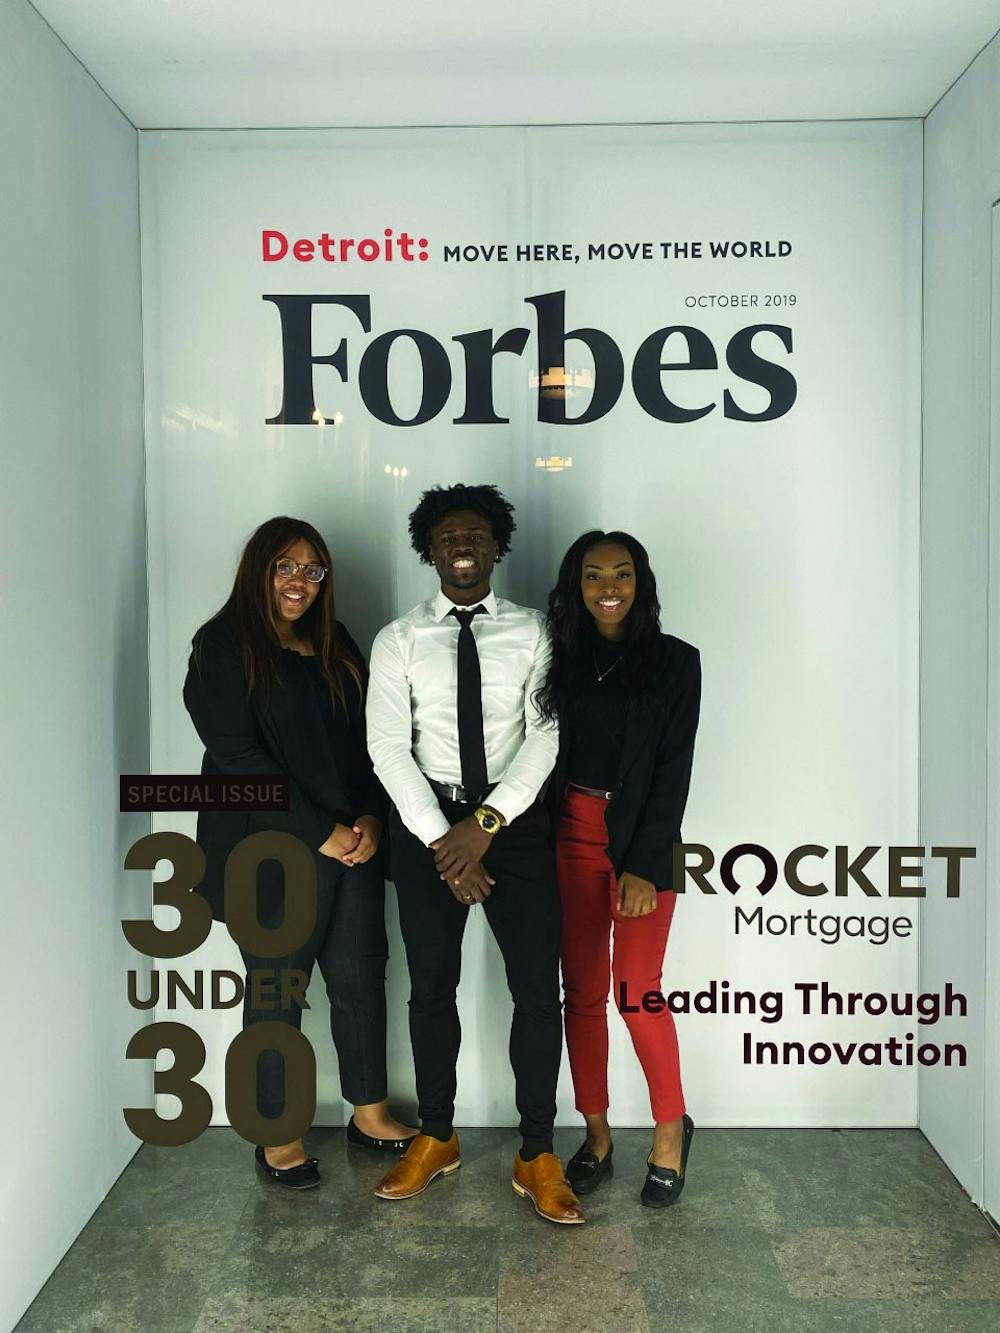 Senior Kaylah Bell (left), junior Aric Fulton Jr. (middle) and senior Tazia Williams (right) attend the Forbes Under 30 Summit Oct. 27-30 in Detroit. Bell, Fulton and Williams were three of 1,000 students selected to receive a scholarship which paid for the fee to attend the conference. Aric Fulton, Photo Provided